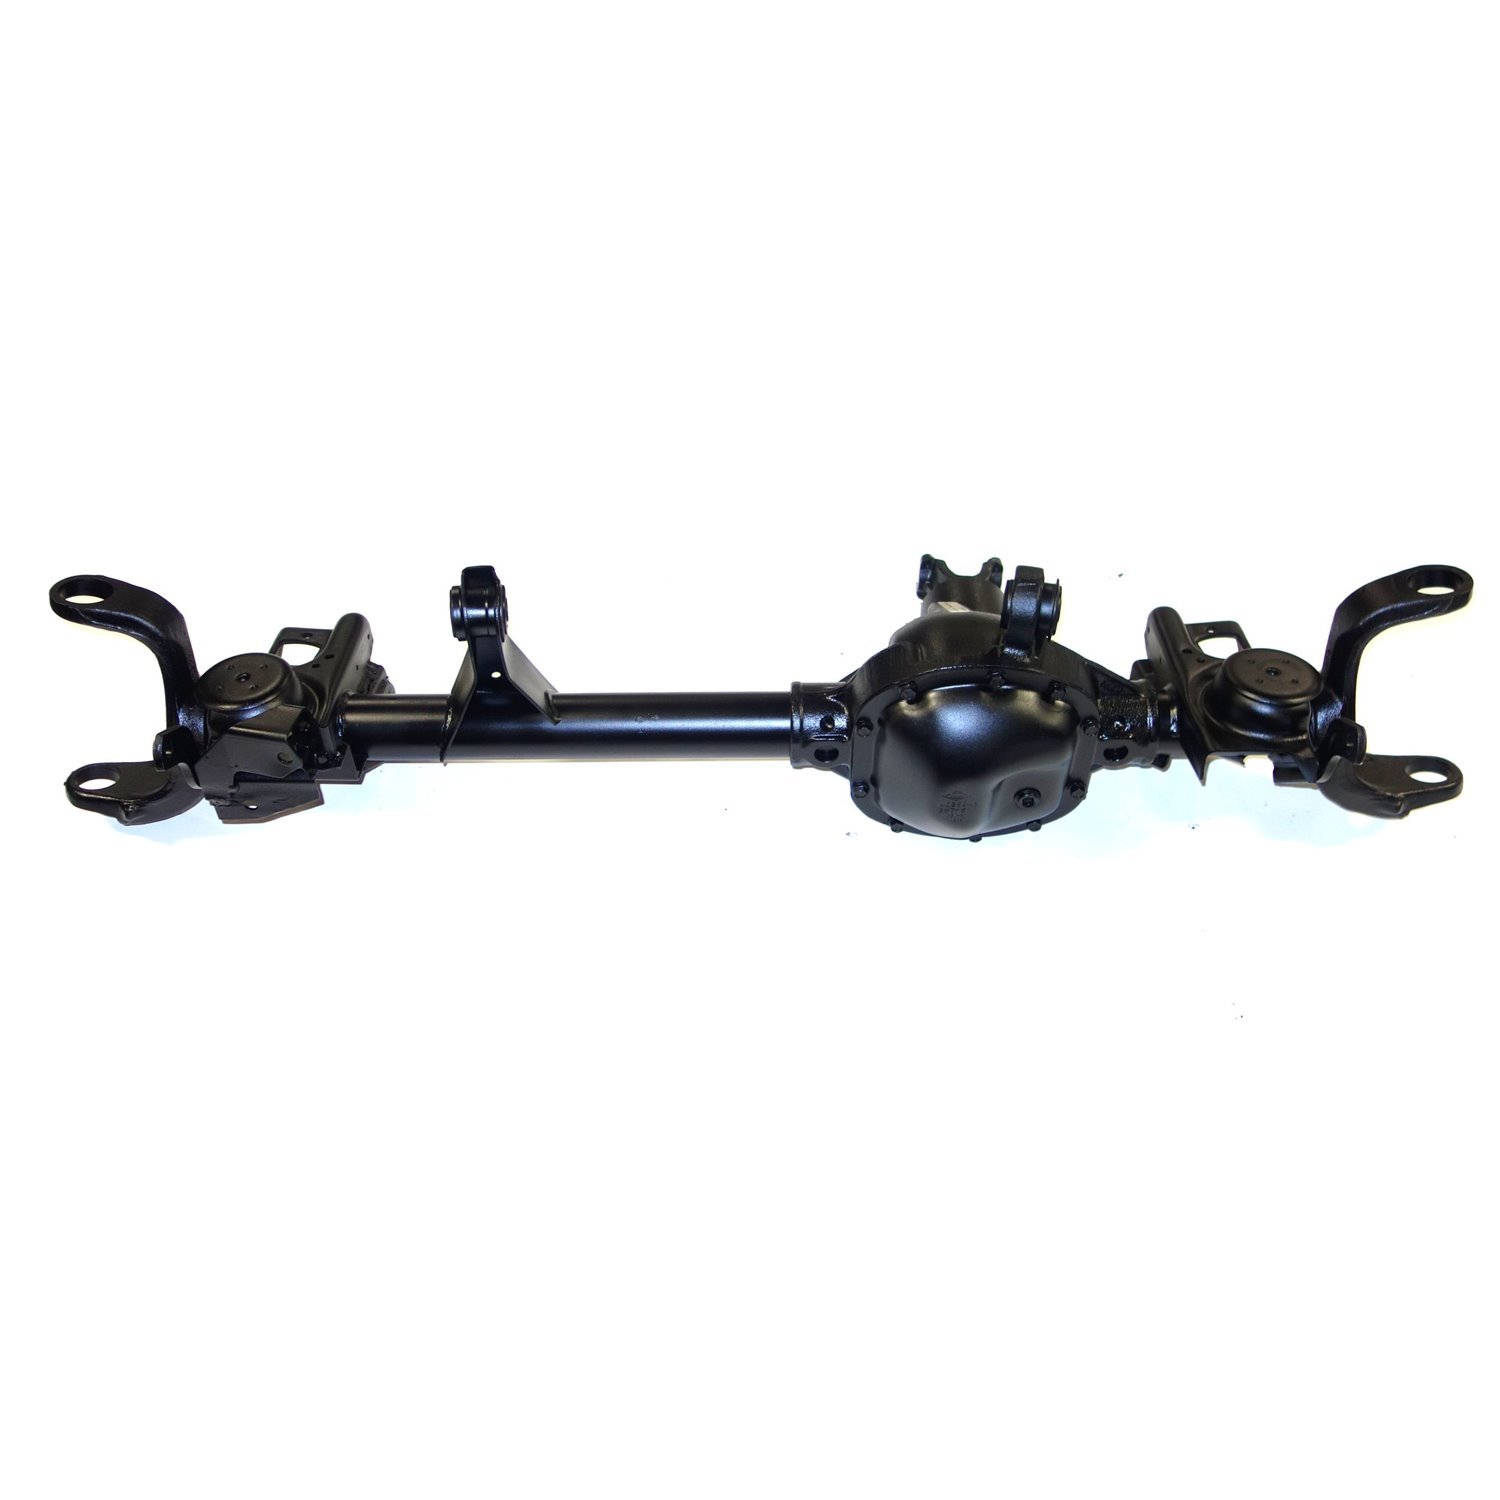 Remanufactured Complete Axle Assembly for Dana 30 97-05 Jeep Wrangler 3.07 Ratio with ABS